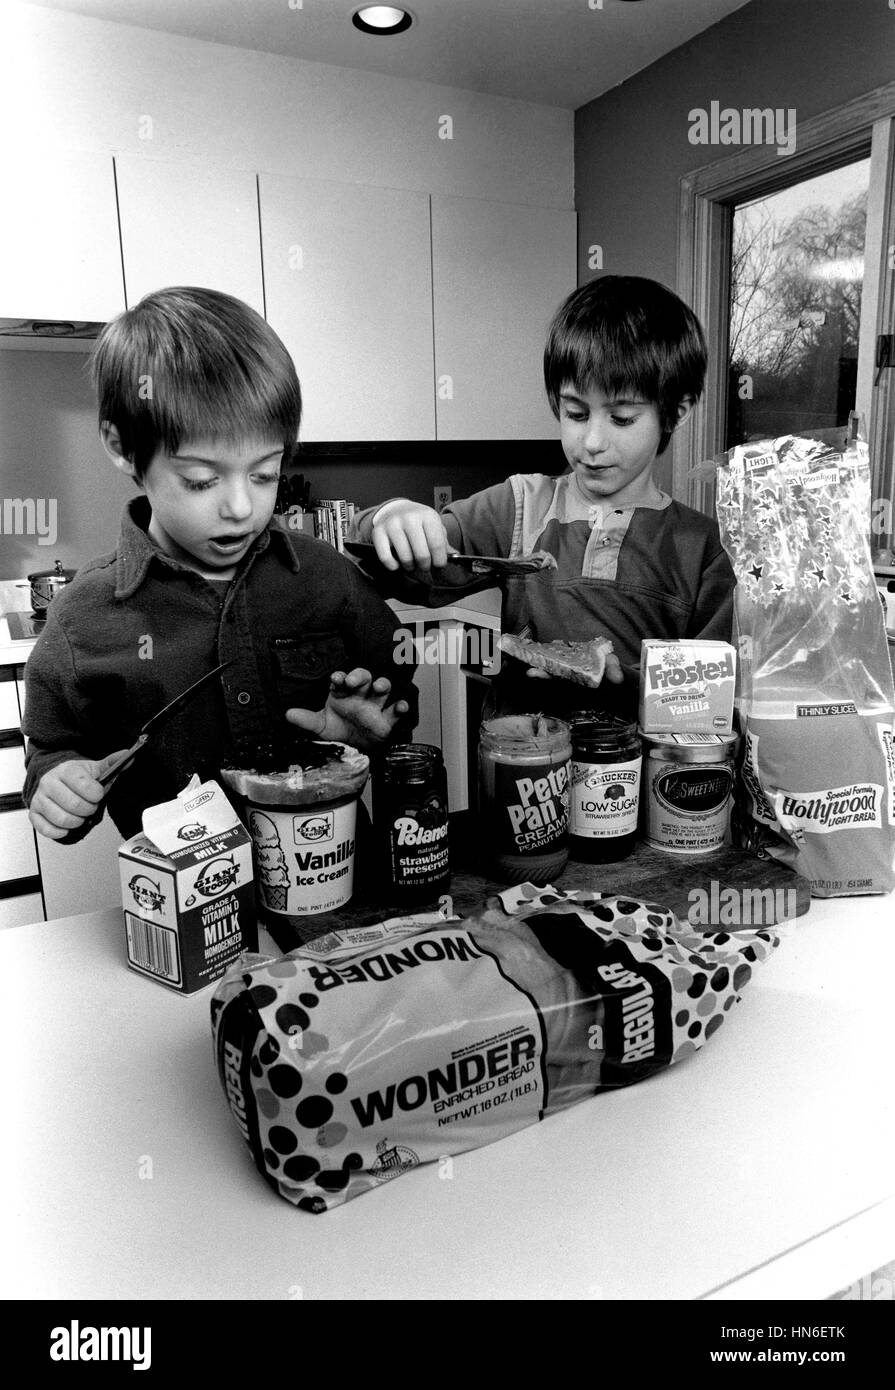 Young boys make peanut butter and jelly sandwiches using named brand grocery products including Wonder bread and Peter Pan peanut butter in a home kitchen. The FDA helps assure the quality of foods by setting standards spelling out the mandatory and optional ingredients in common foods and requires labeling using common names. Stock Photo